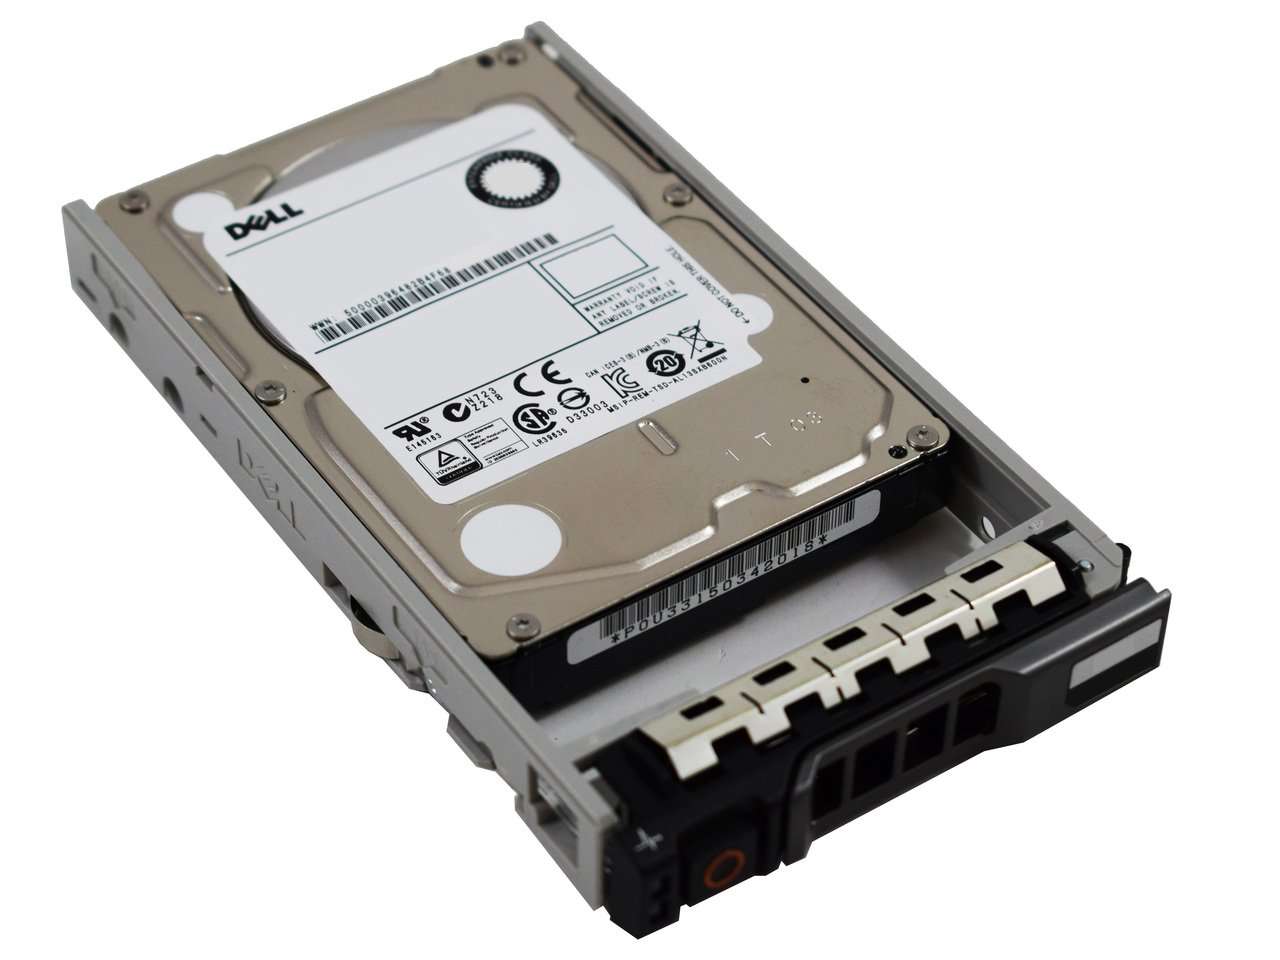 Dell G13 400-AMTW 2TB 7.2K RPM SAS 12Gb/s 512N 2.5" NearLine Manufacturer Recertified HDD